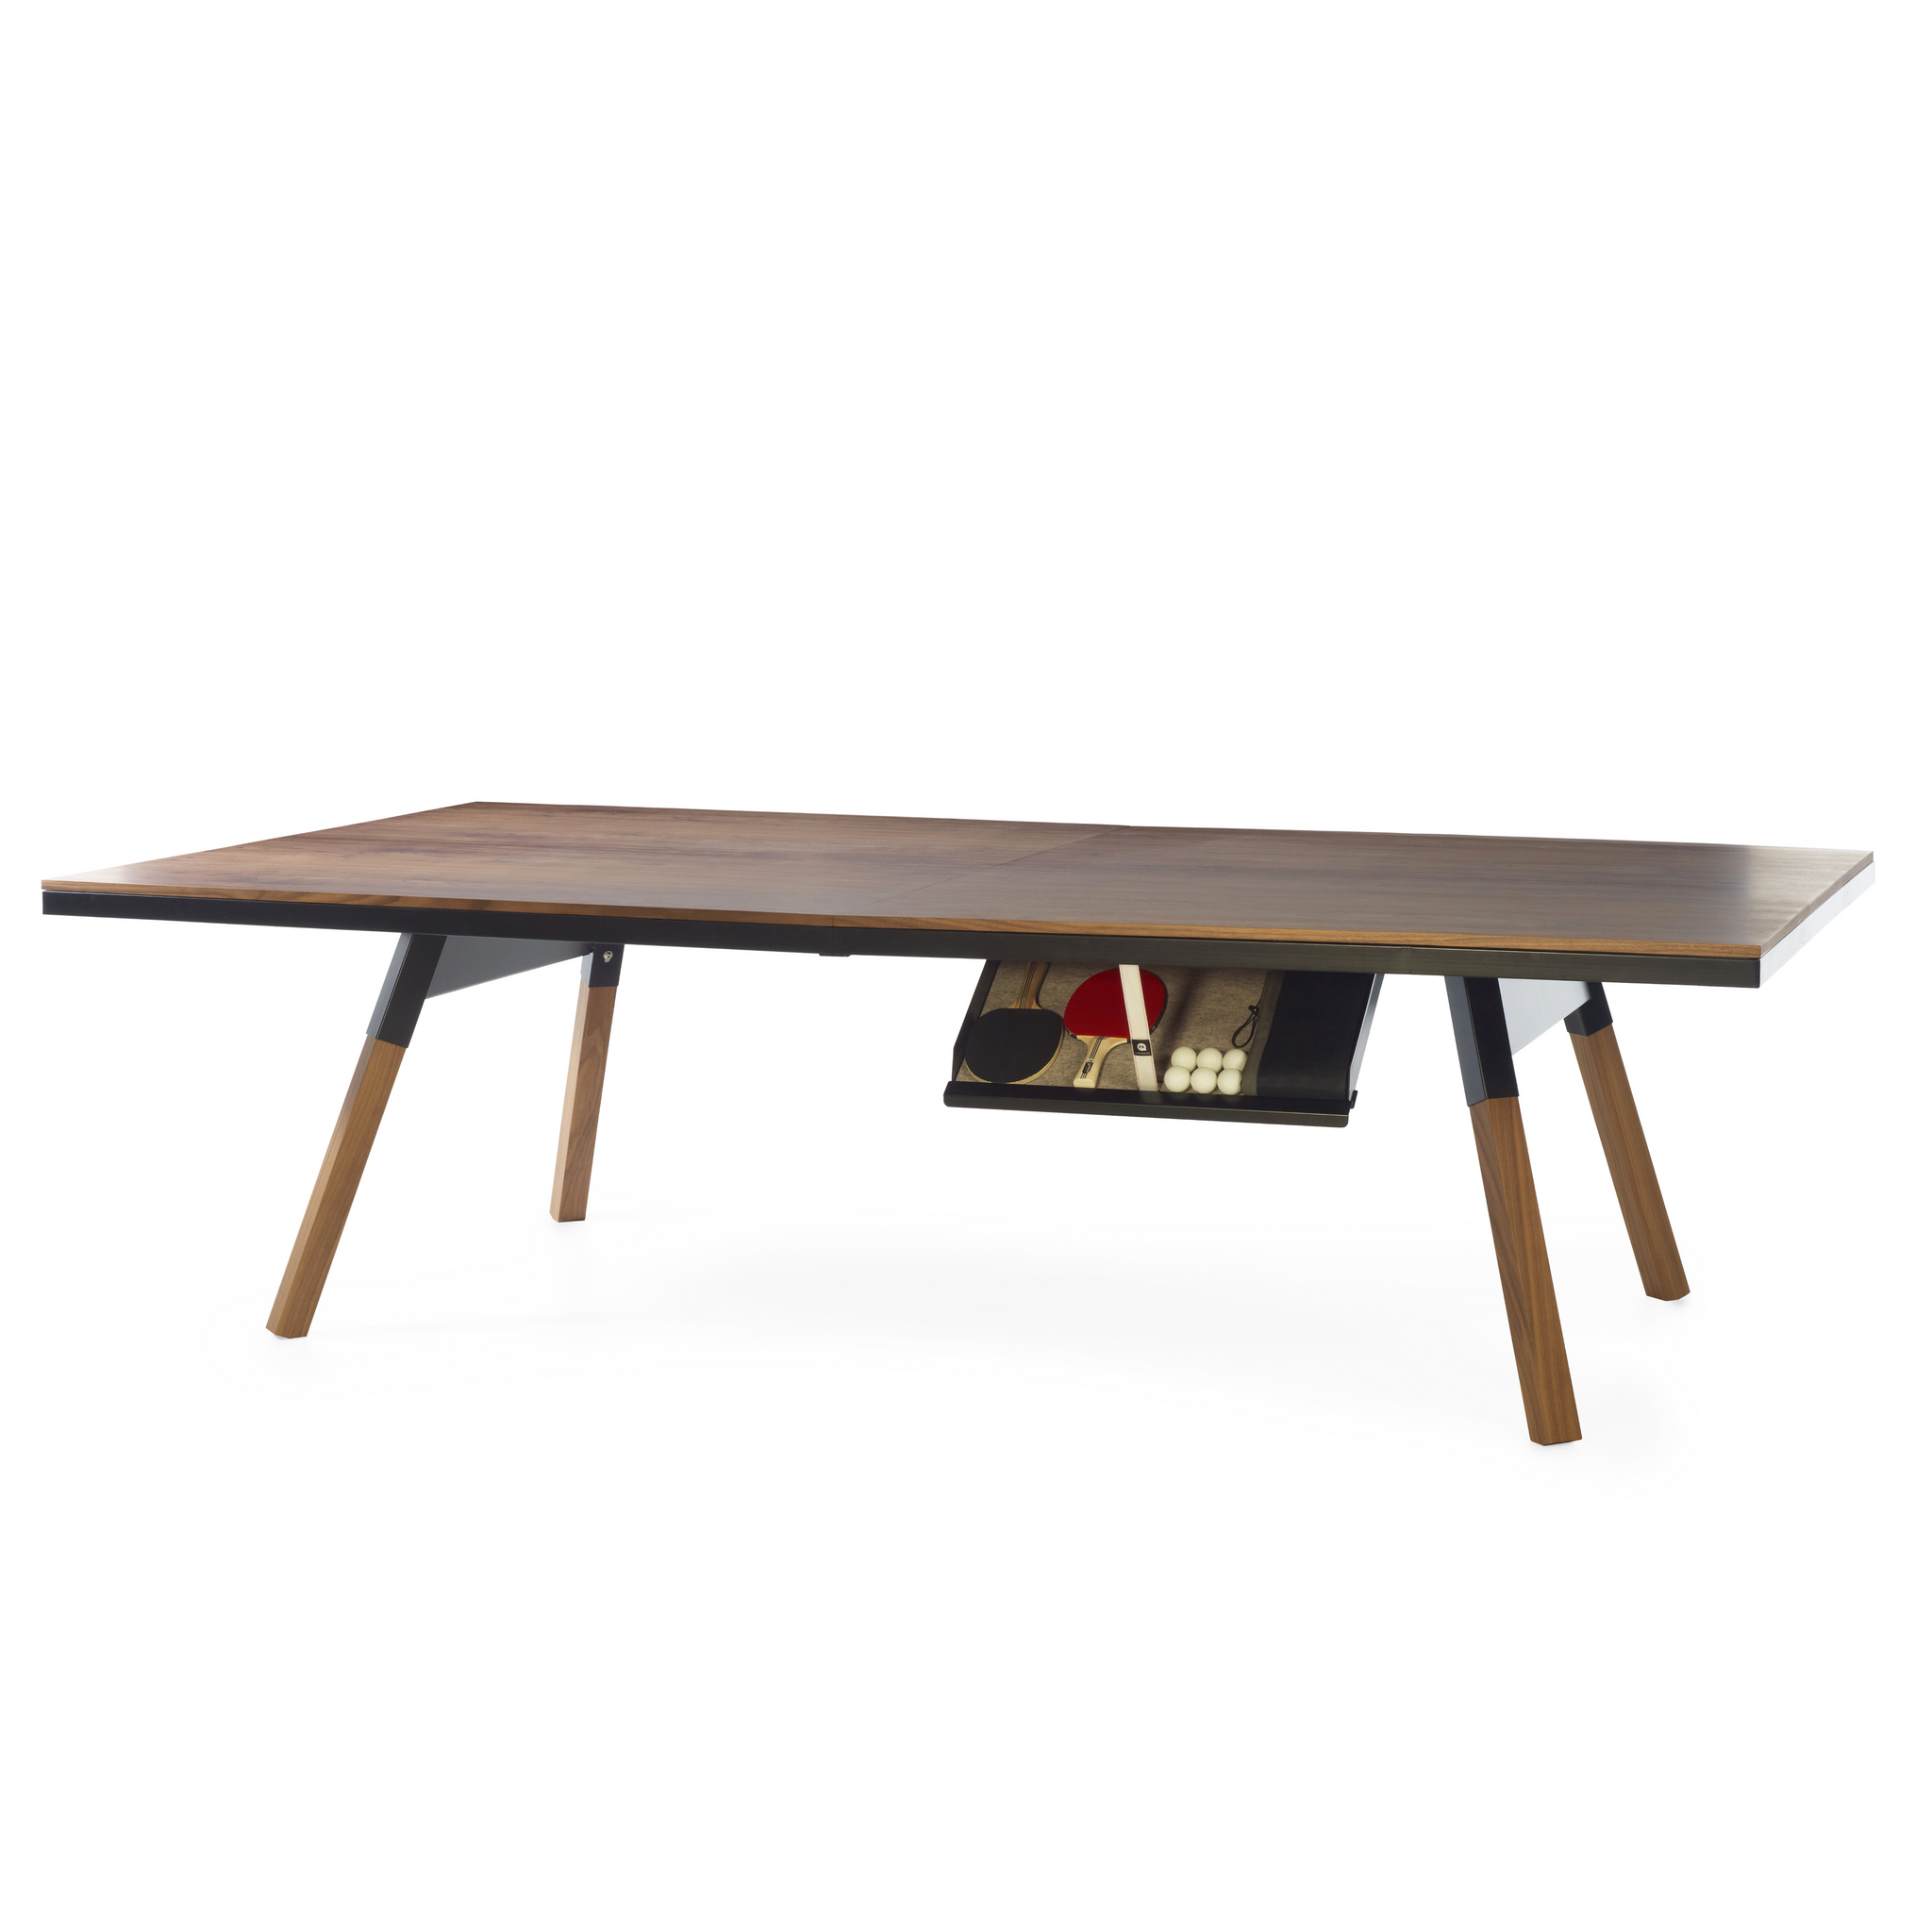 You and Me Tournament Size Table Tennis in Walnut & Black